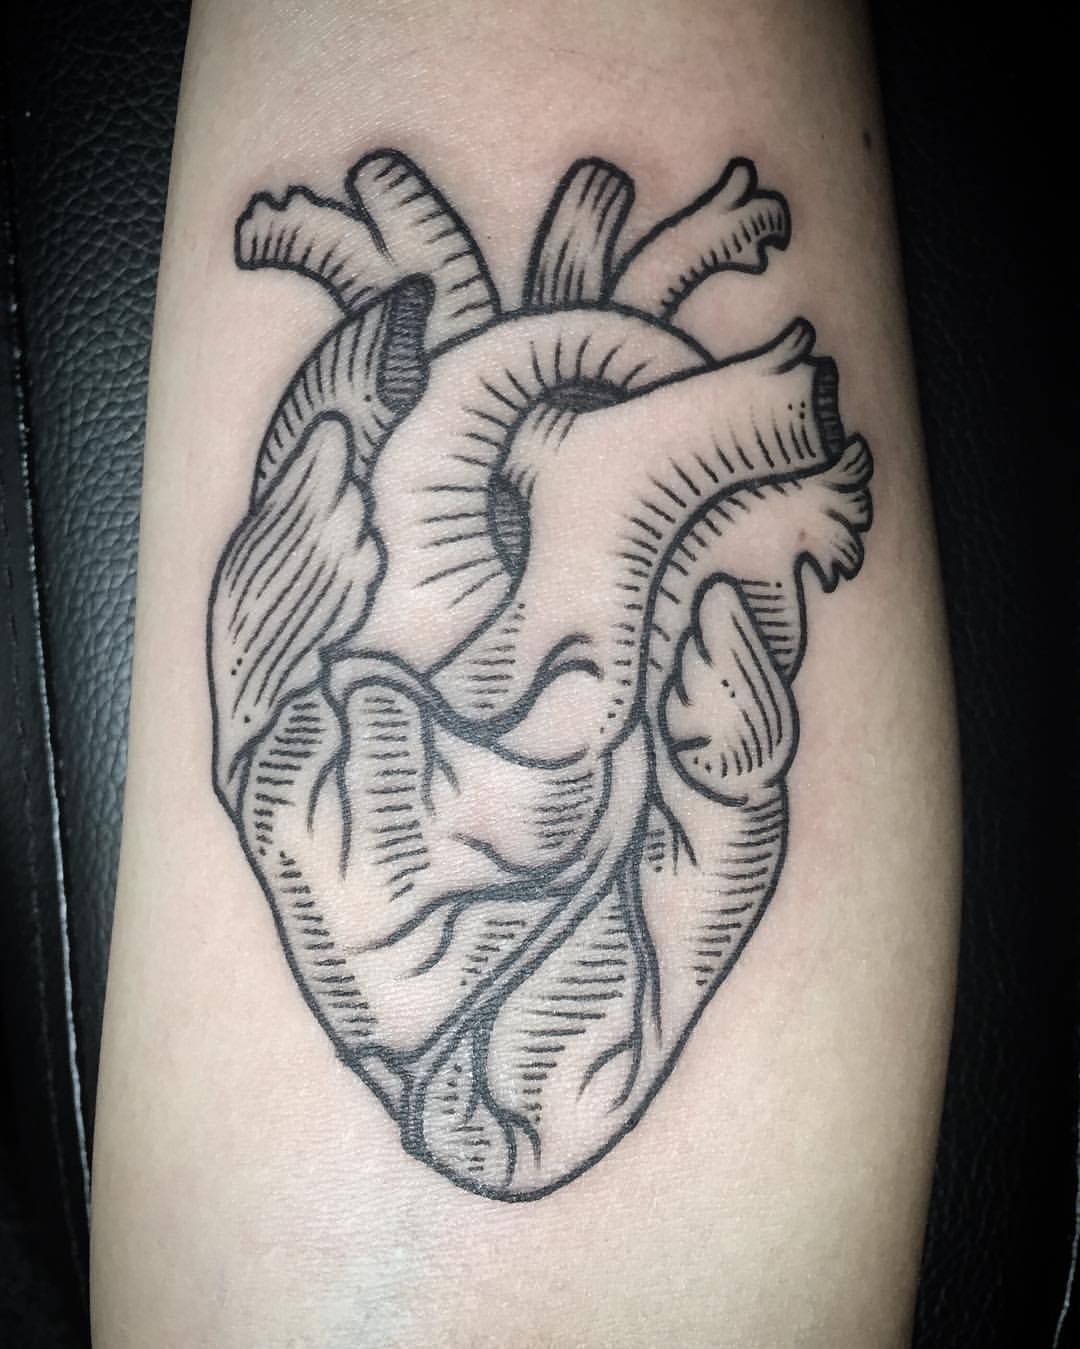 Anatomical Heart Tattoo Designs For Guys With Meaning (25)